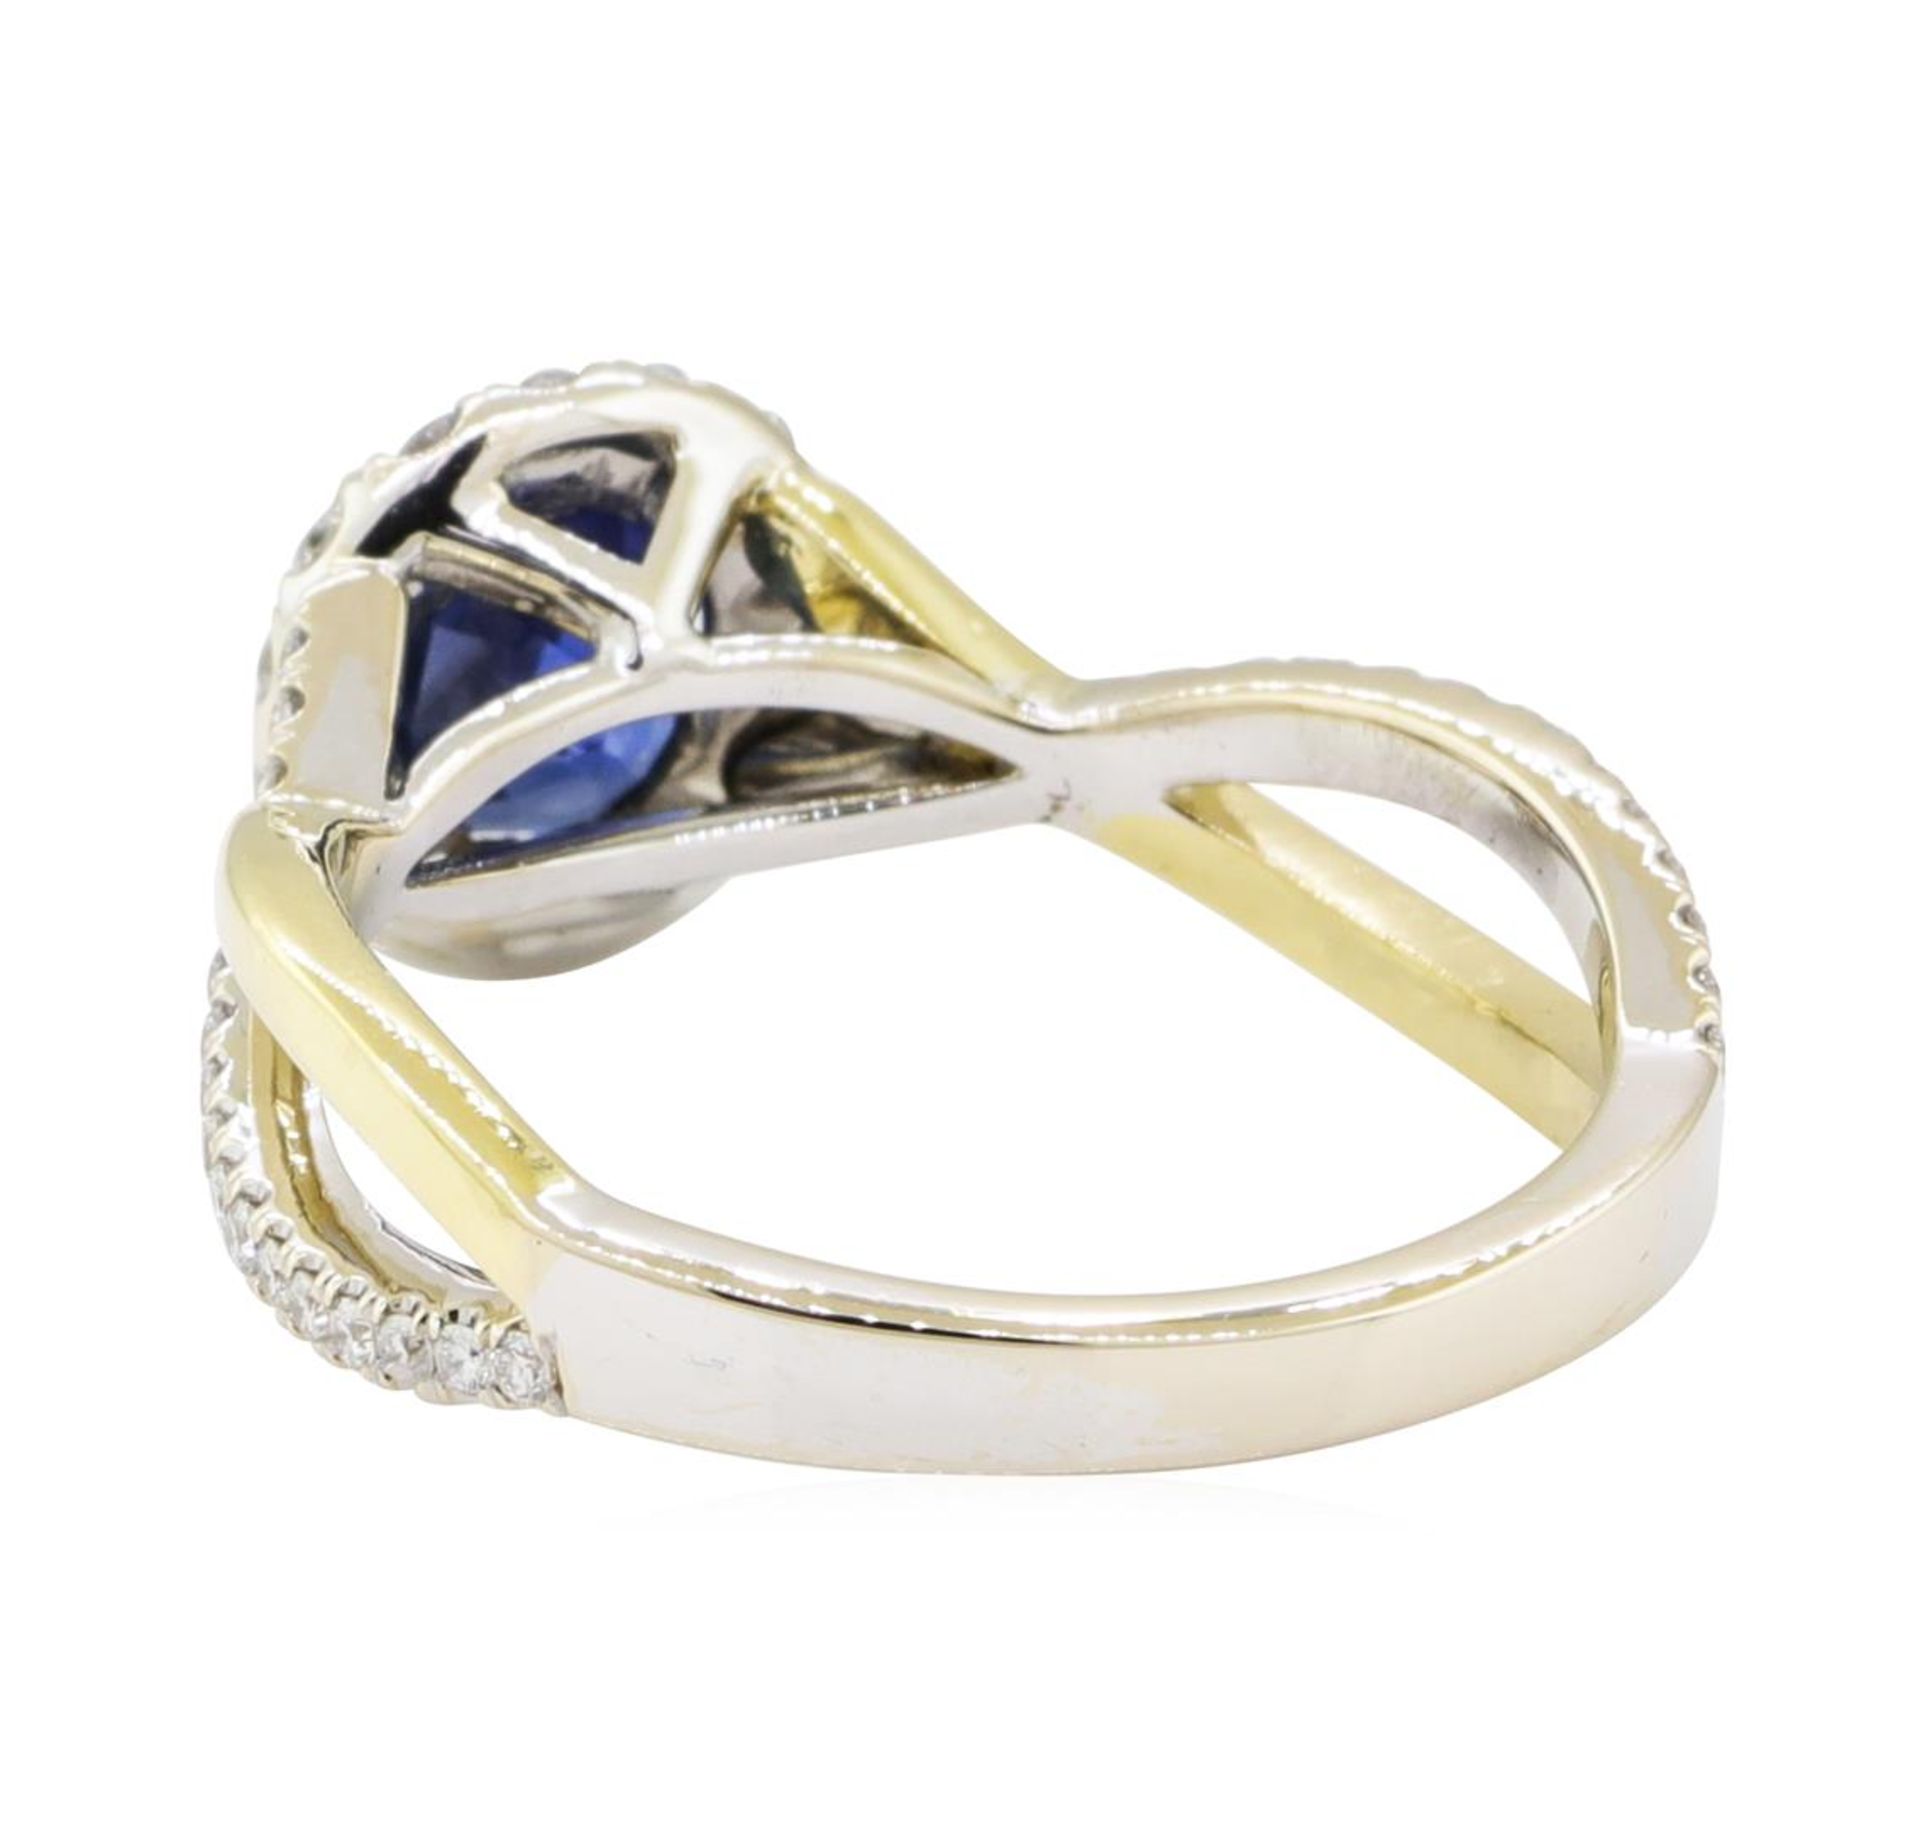 1.77 ctw Sapphire and Diamond Ring - 18KT White Gold - Image 3 of 5